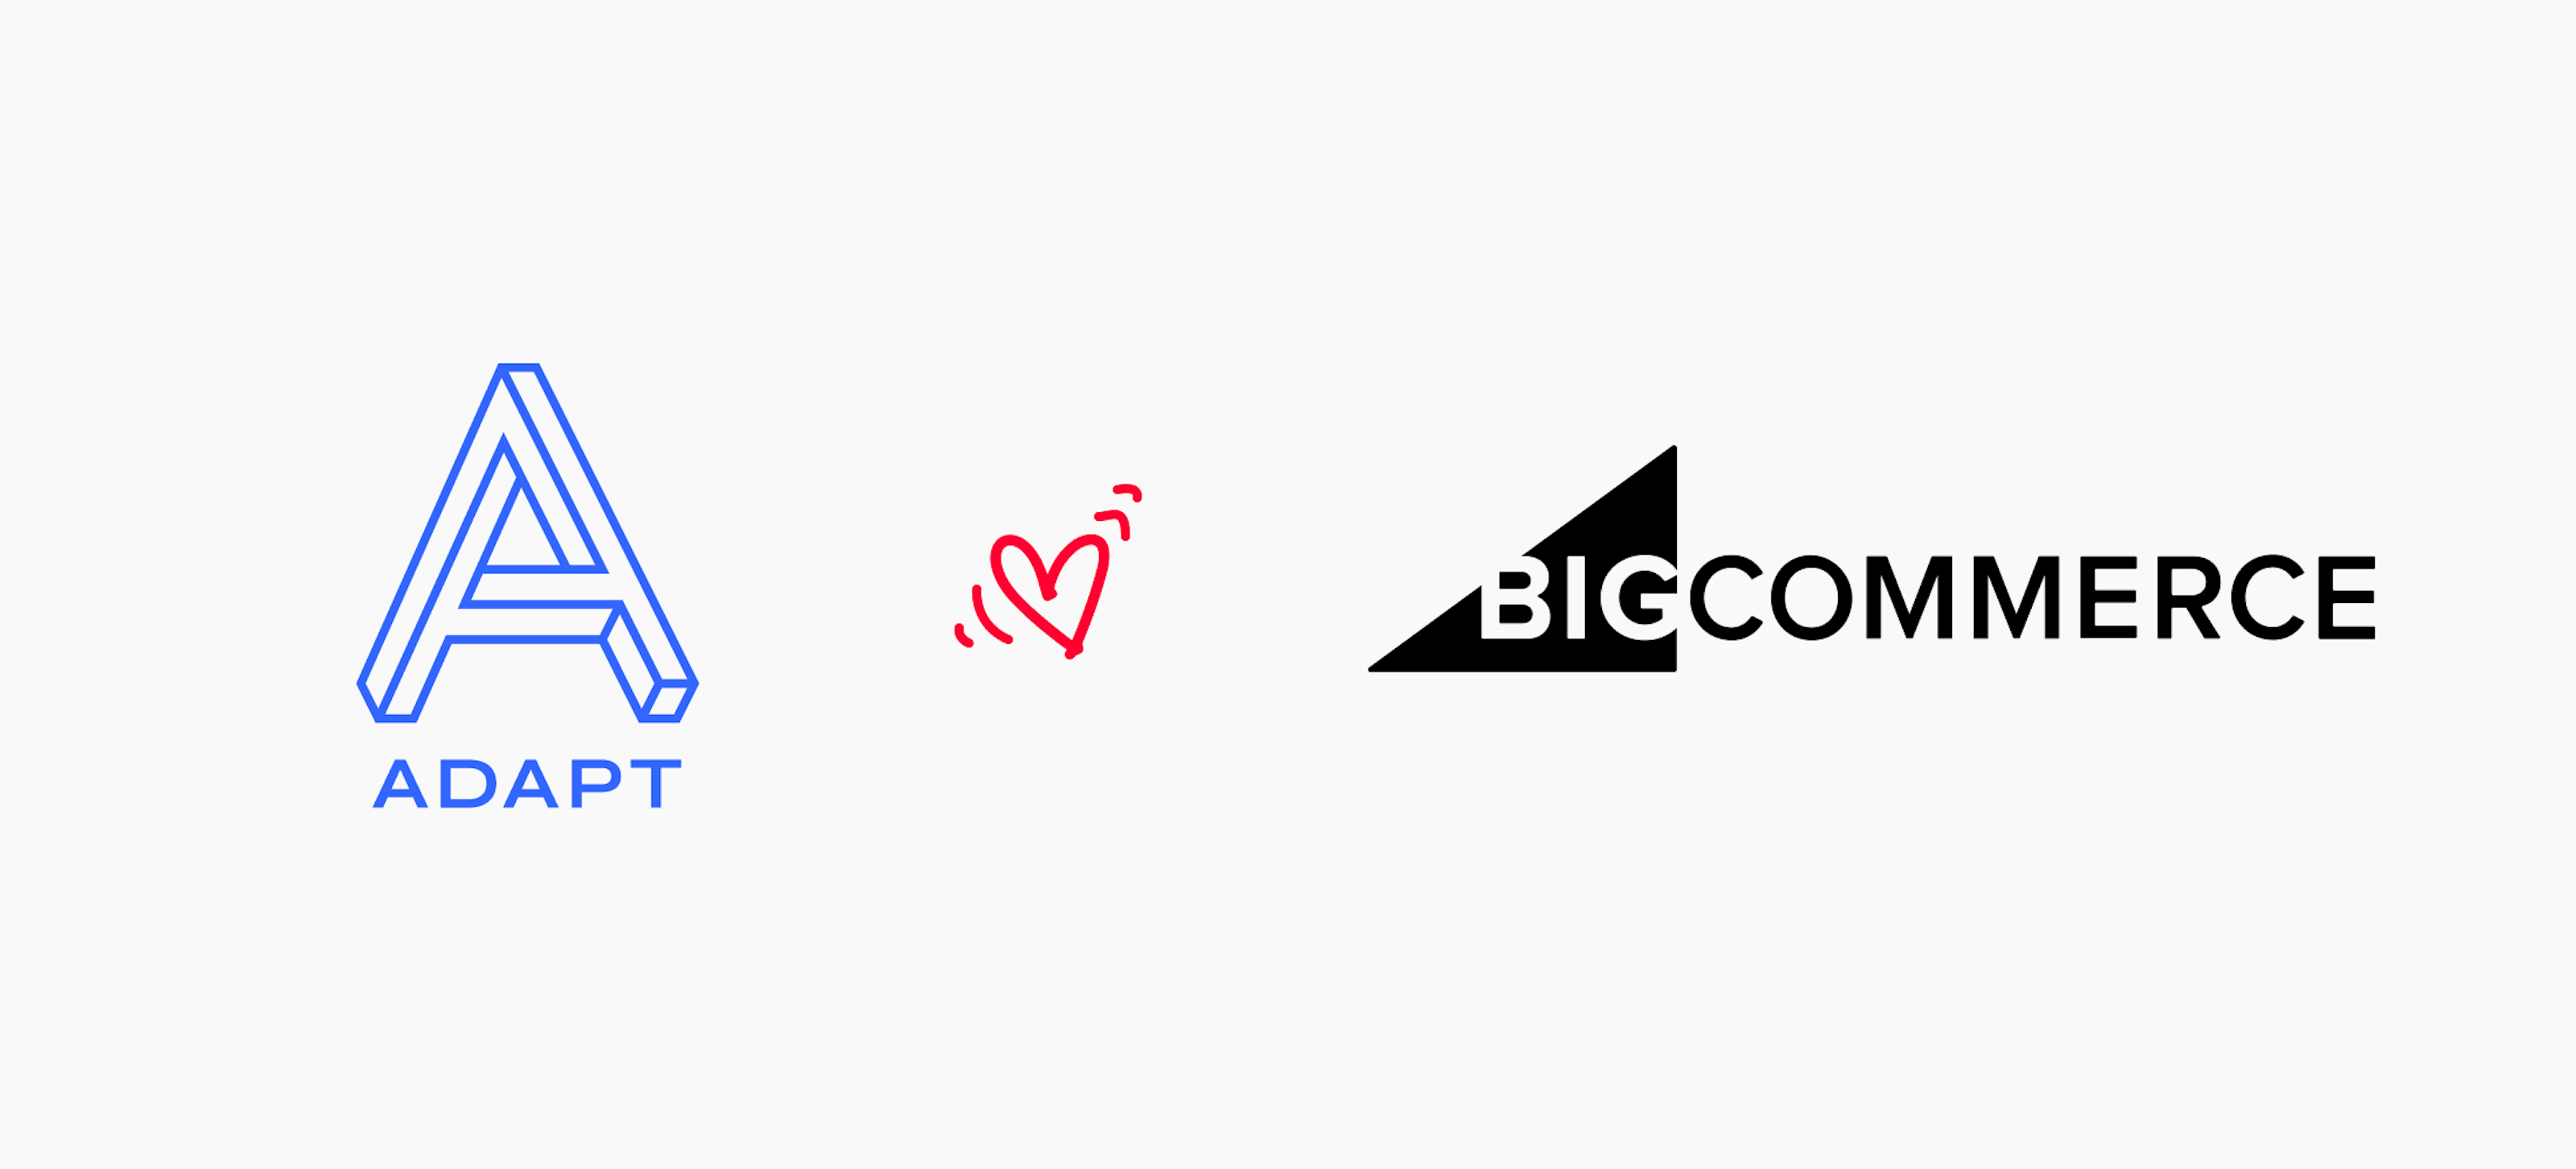 Bigcommerce launches BtB ecommerce platform. Here’s why you should check it out featured image